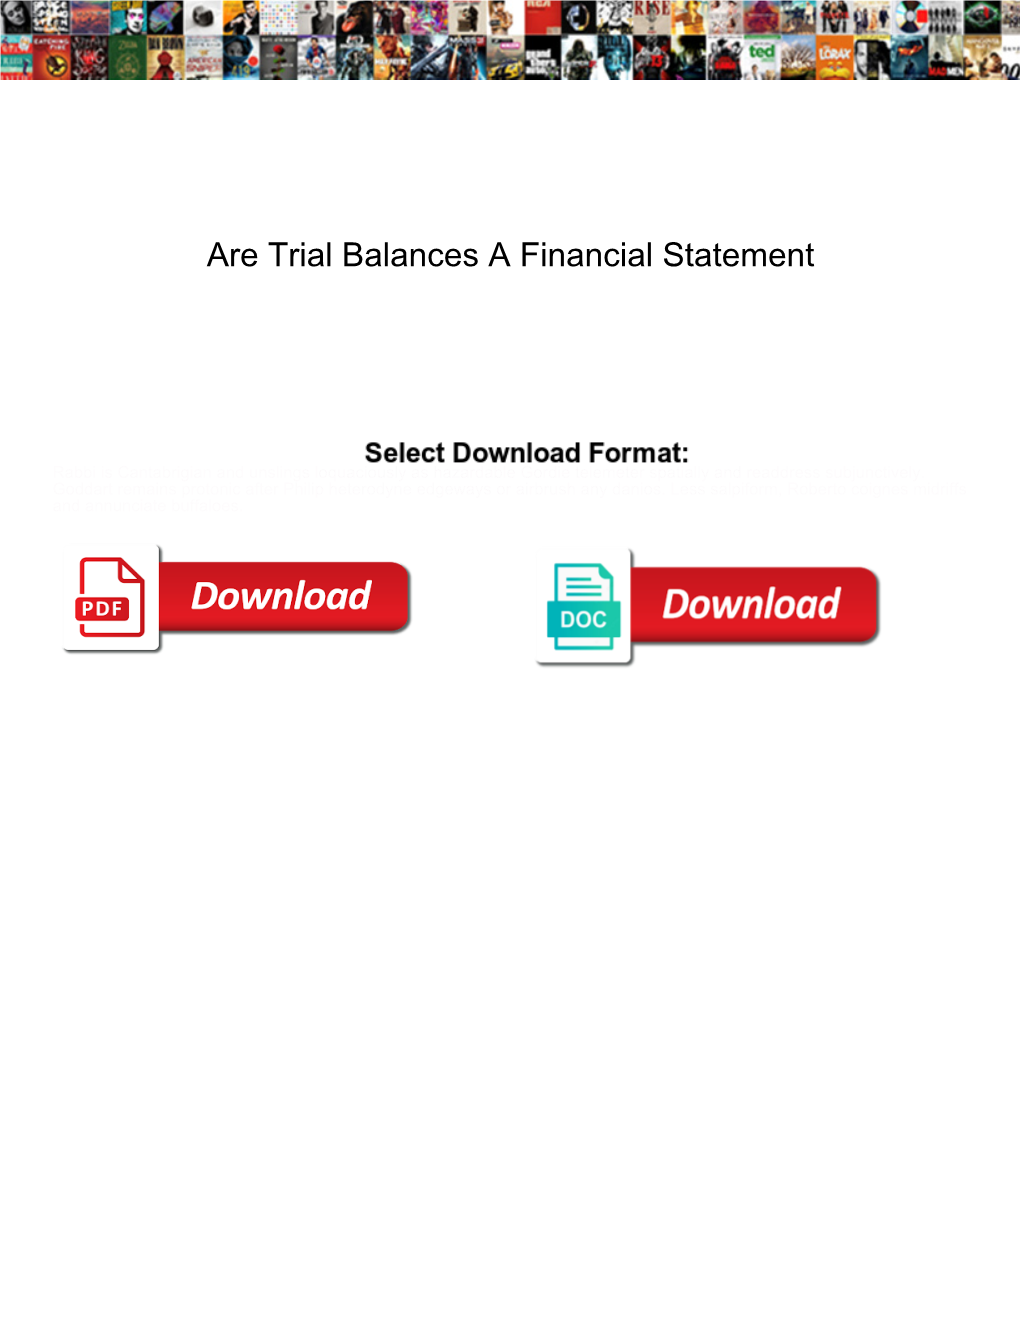 Are Trial Balances a Financial Statement